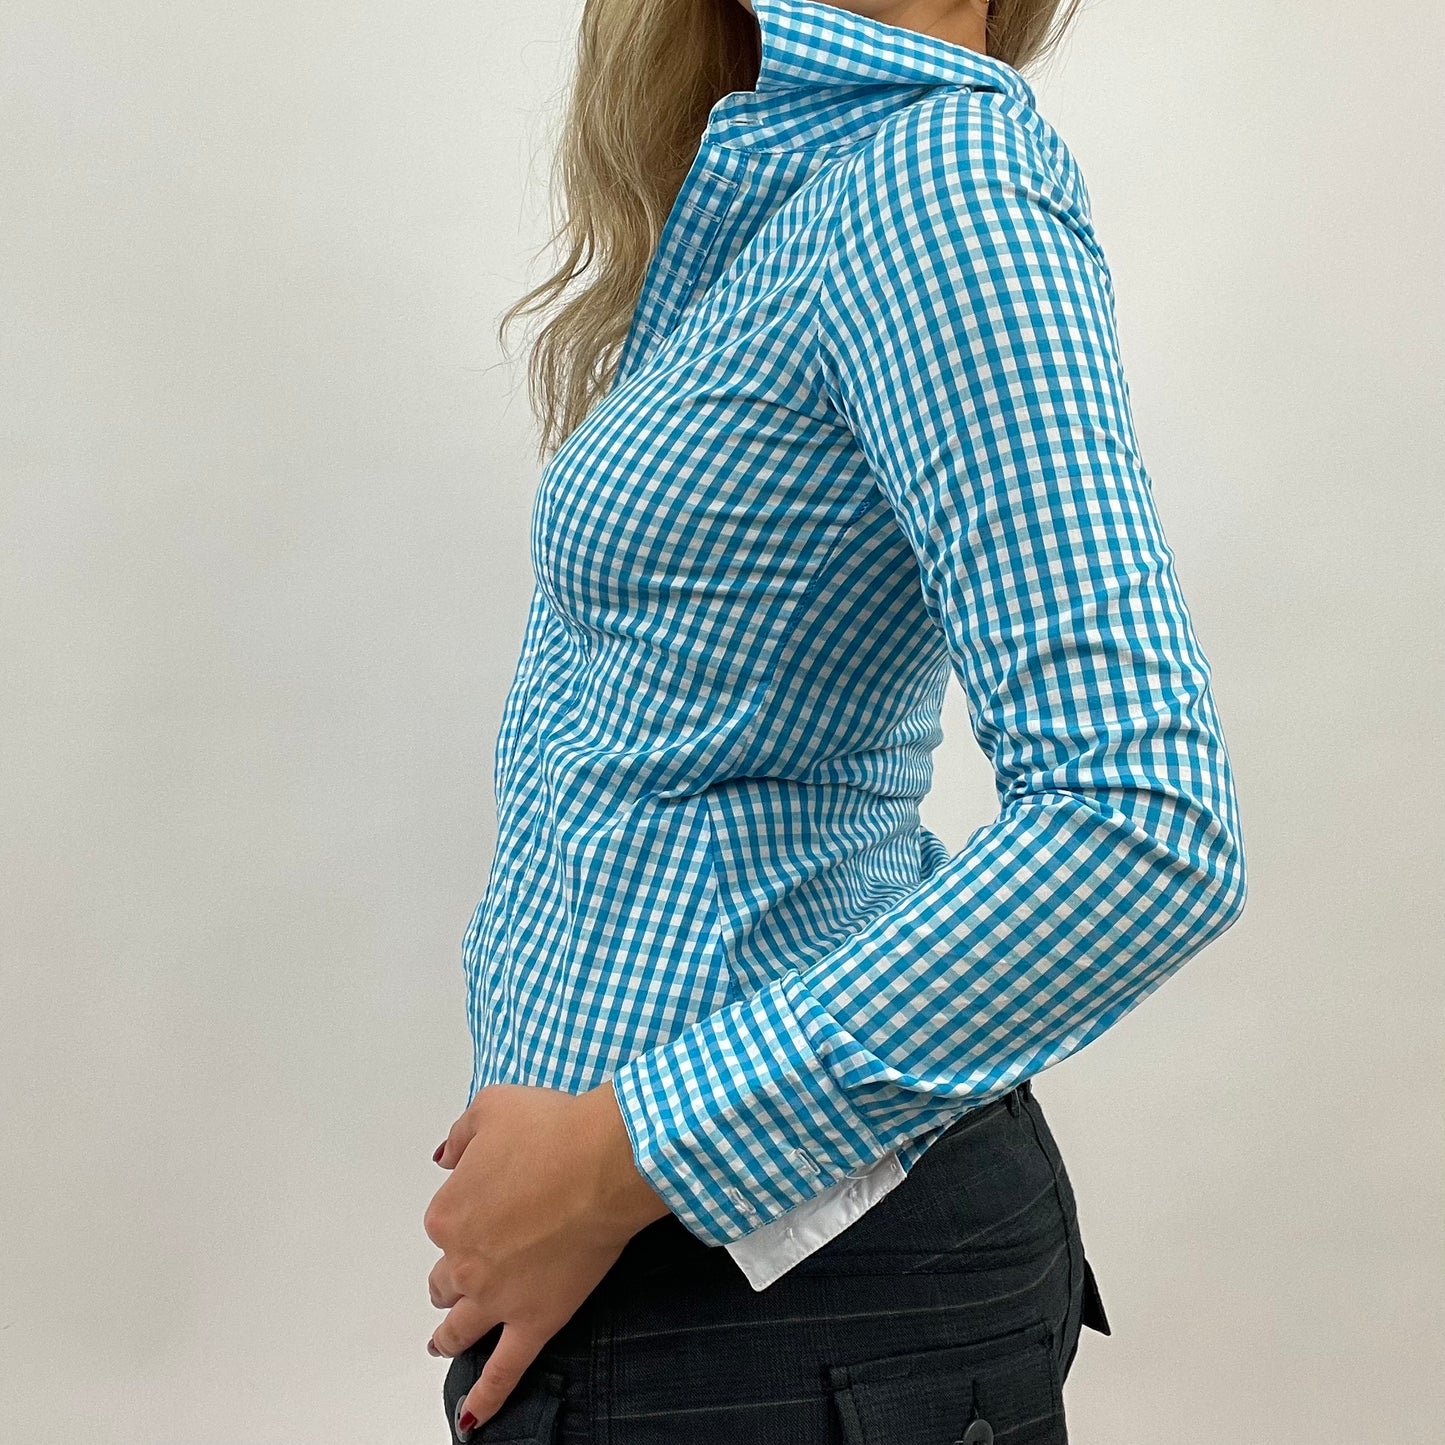 💻 CORPCORE DROP | small blue gingham shirt